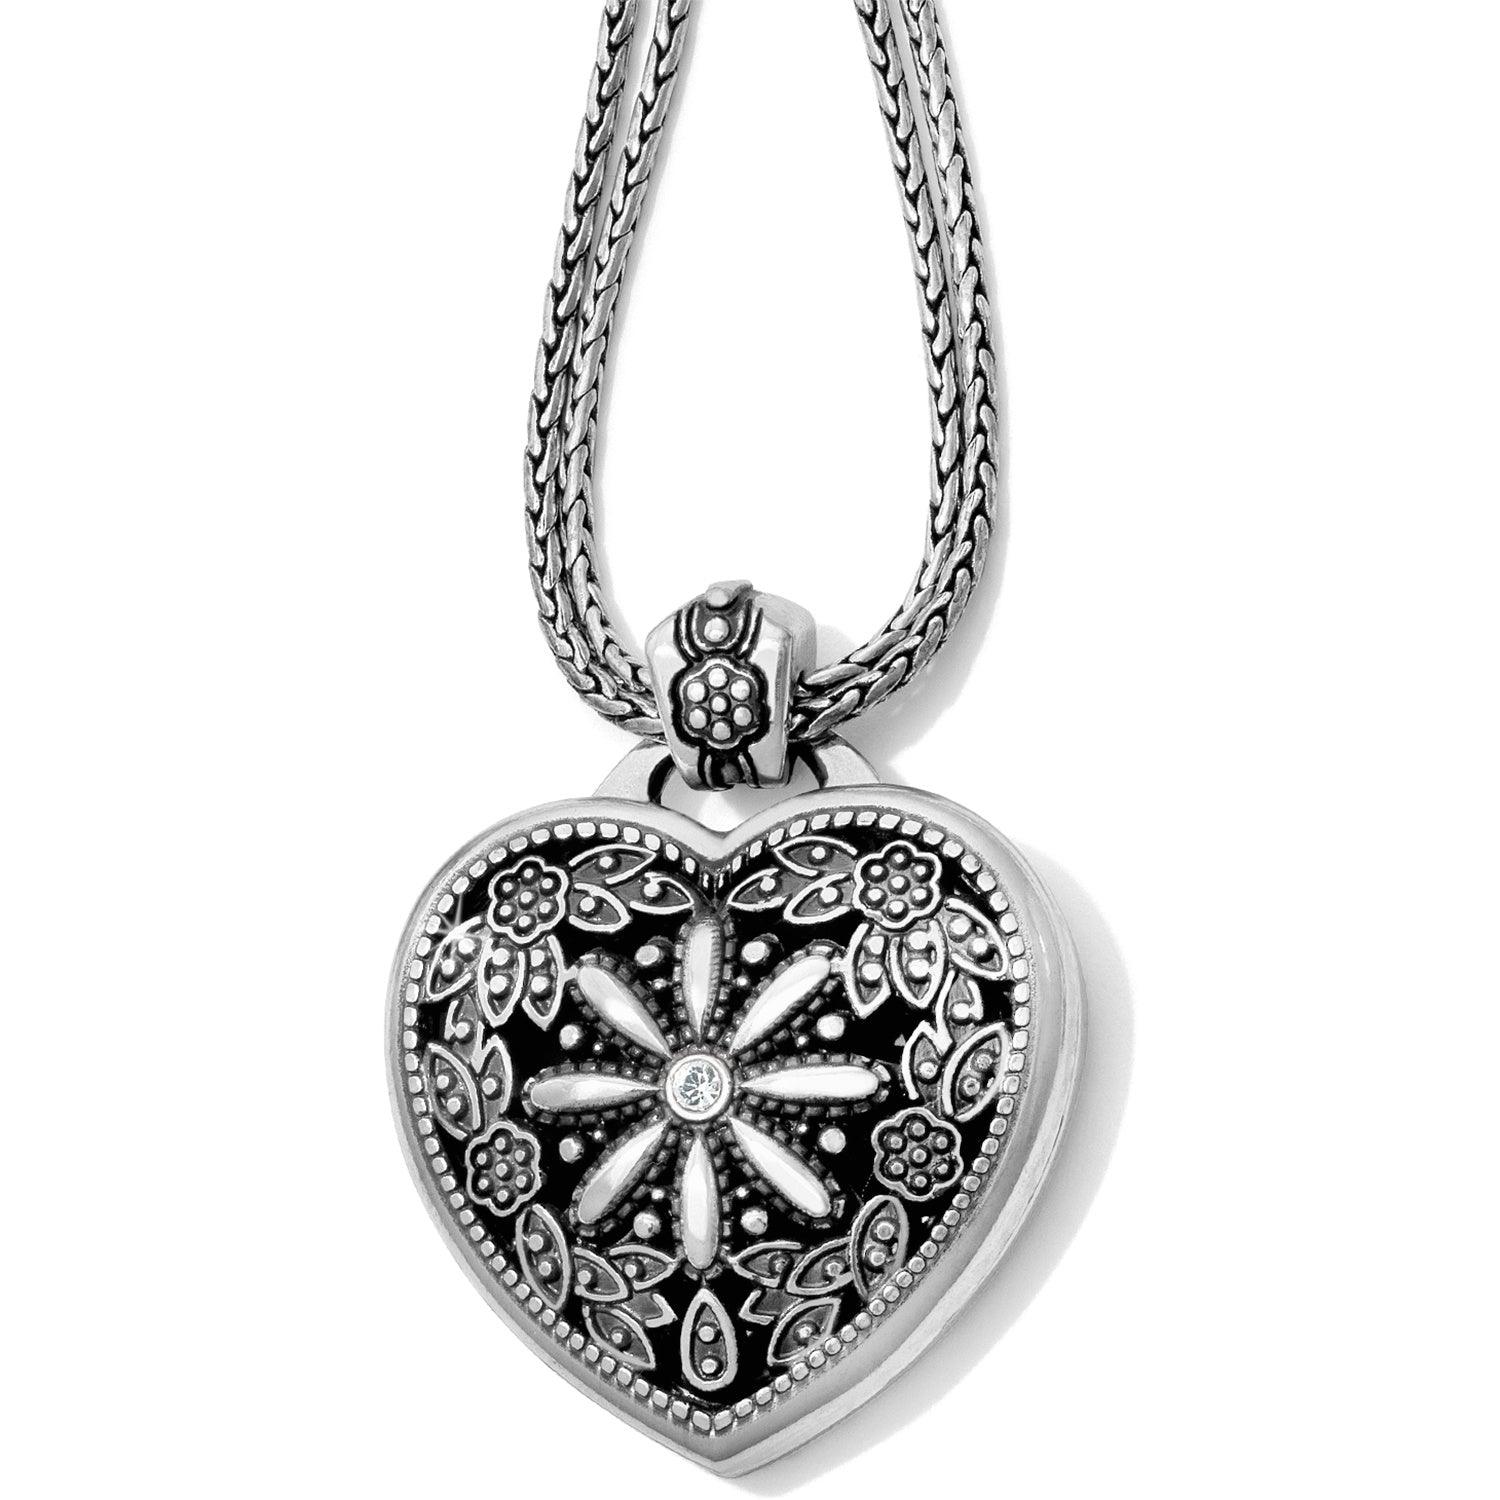 Floral Heart Locket Necklace - The Silver Dahlia